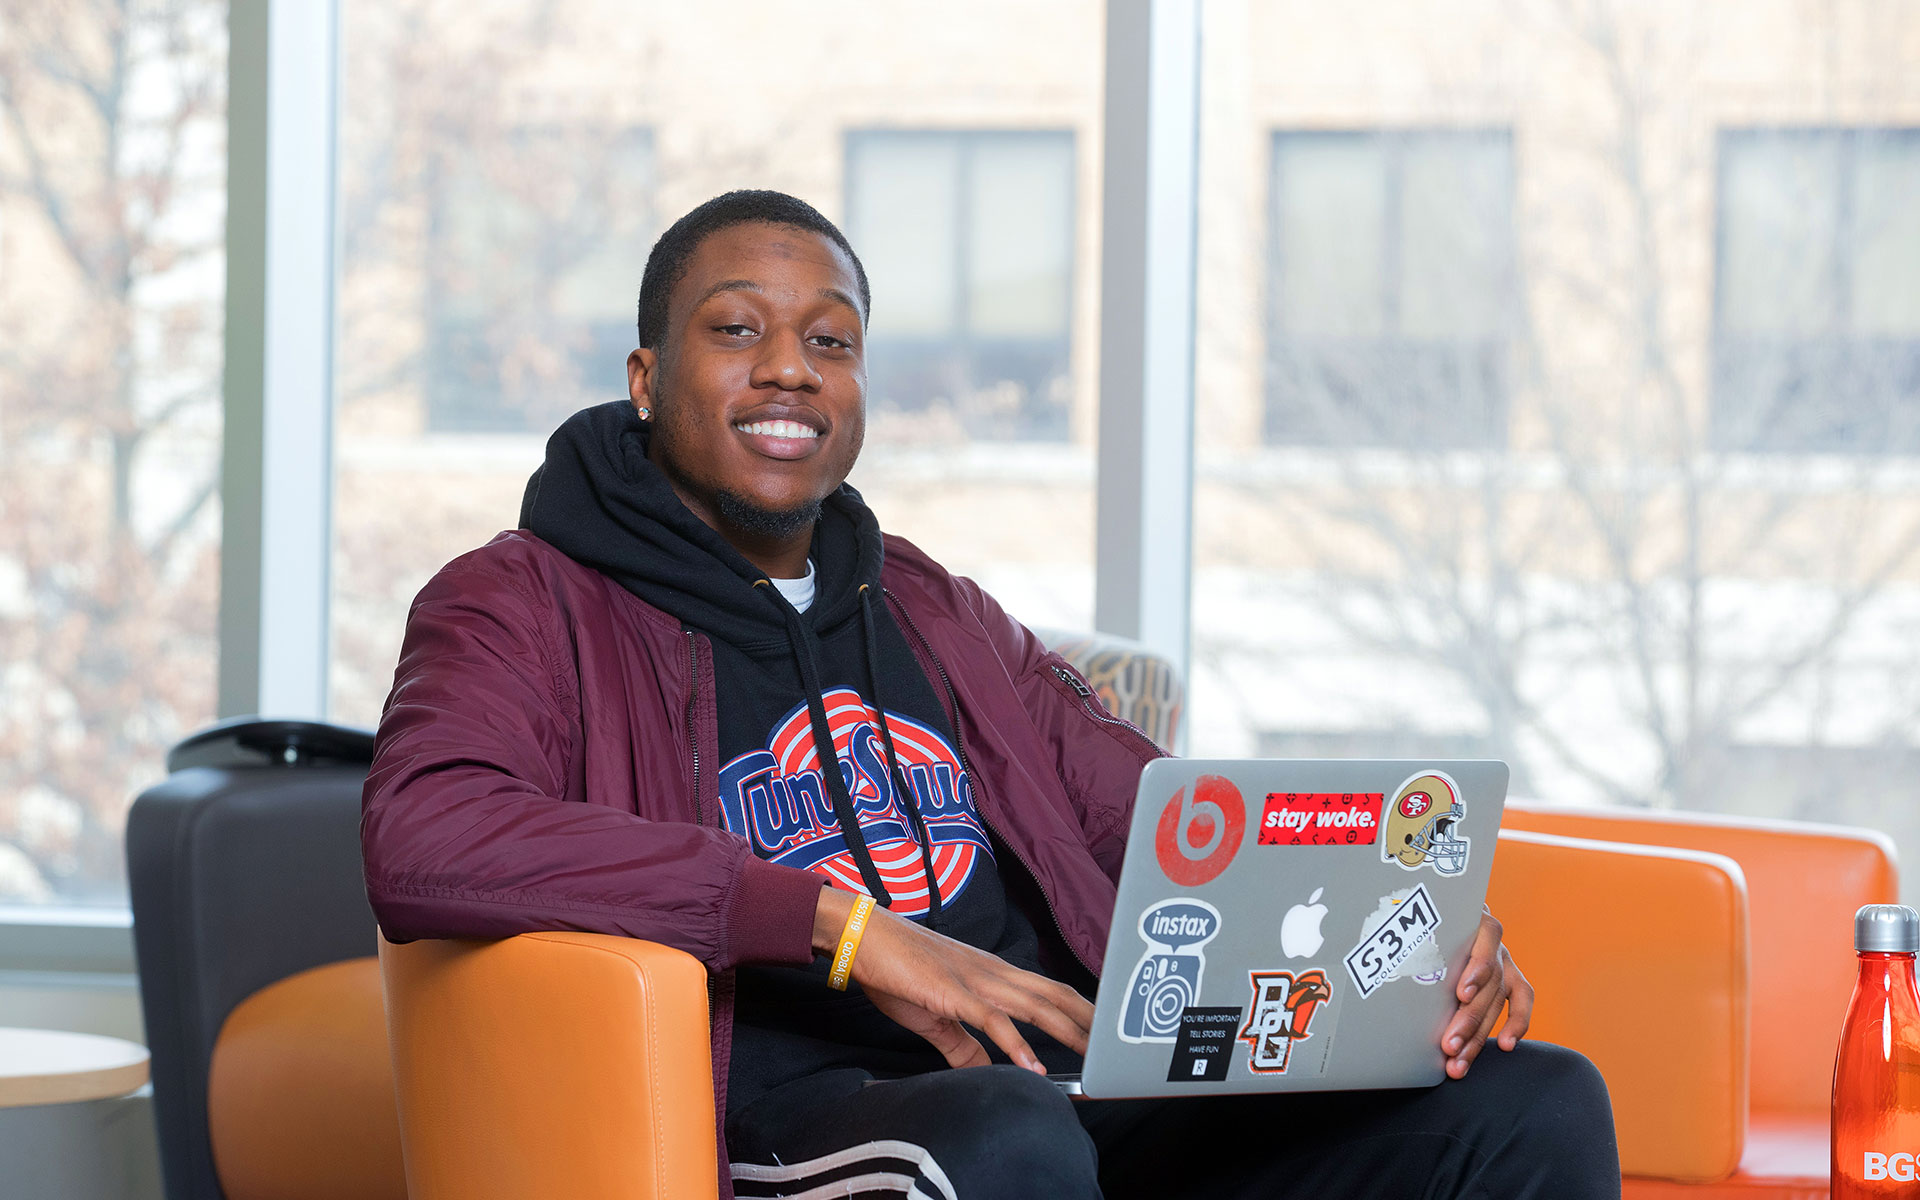 Student using laptop in union smiling at camera